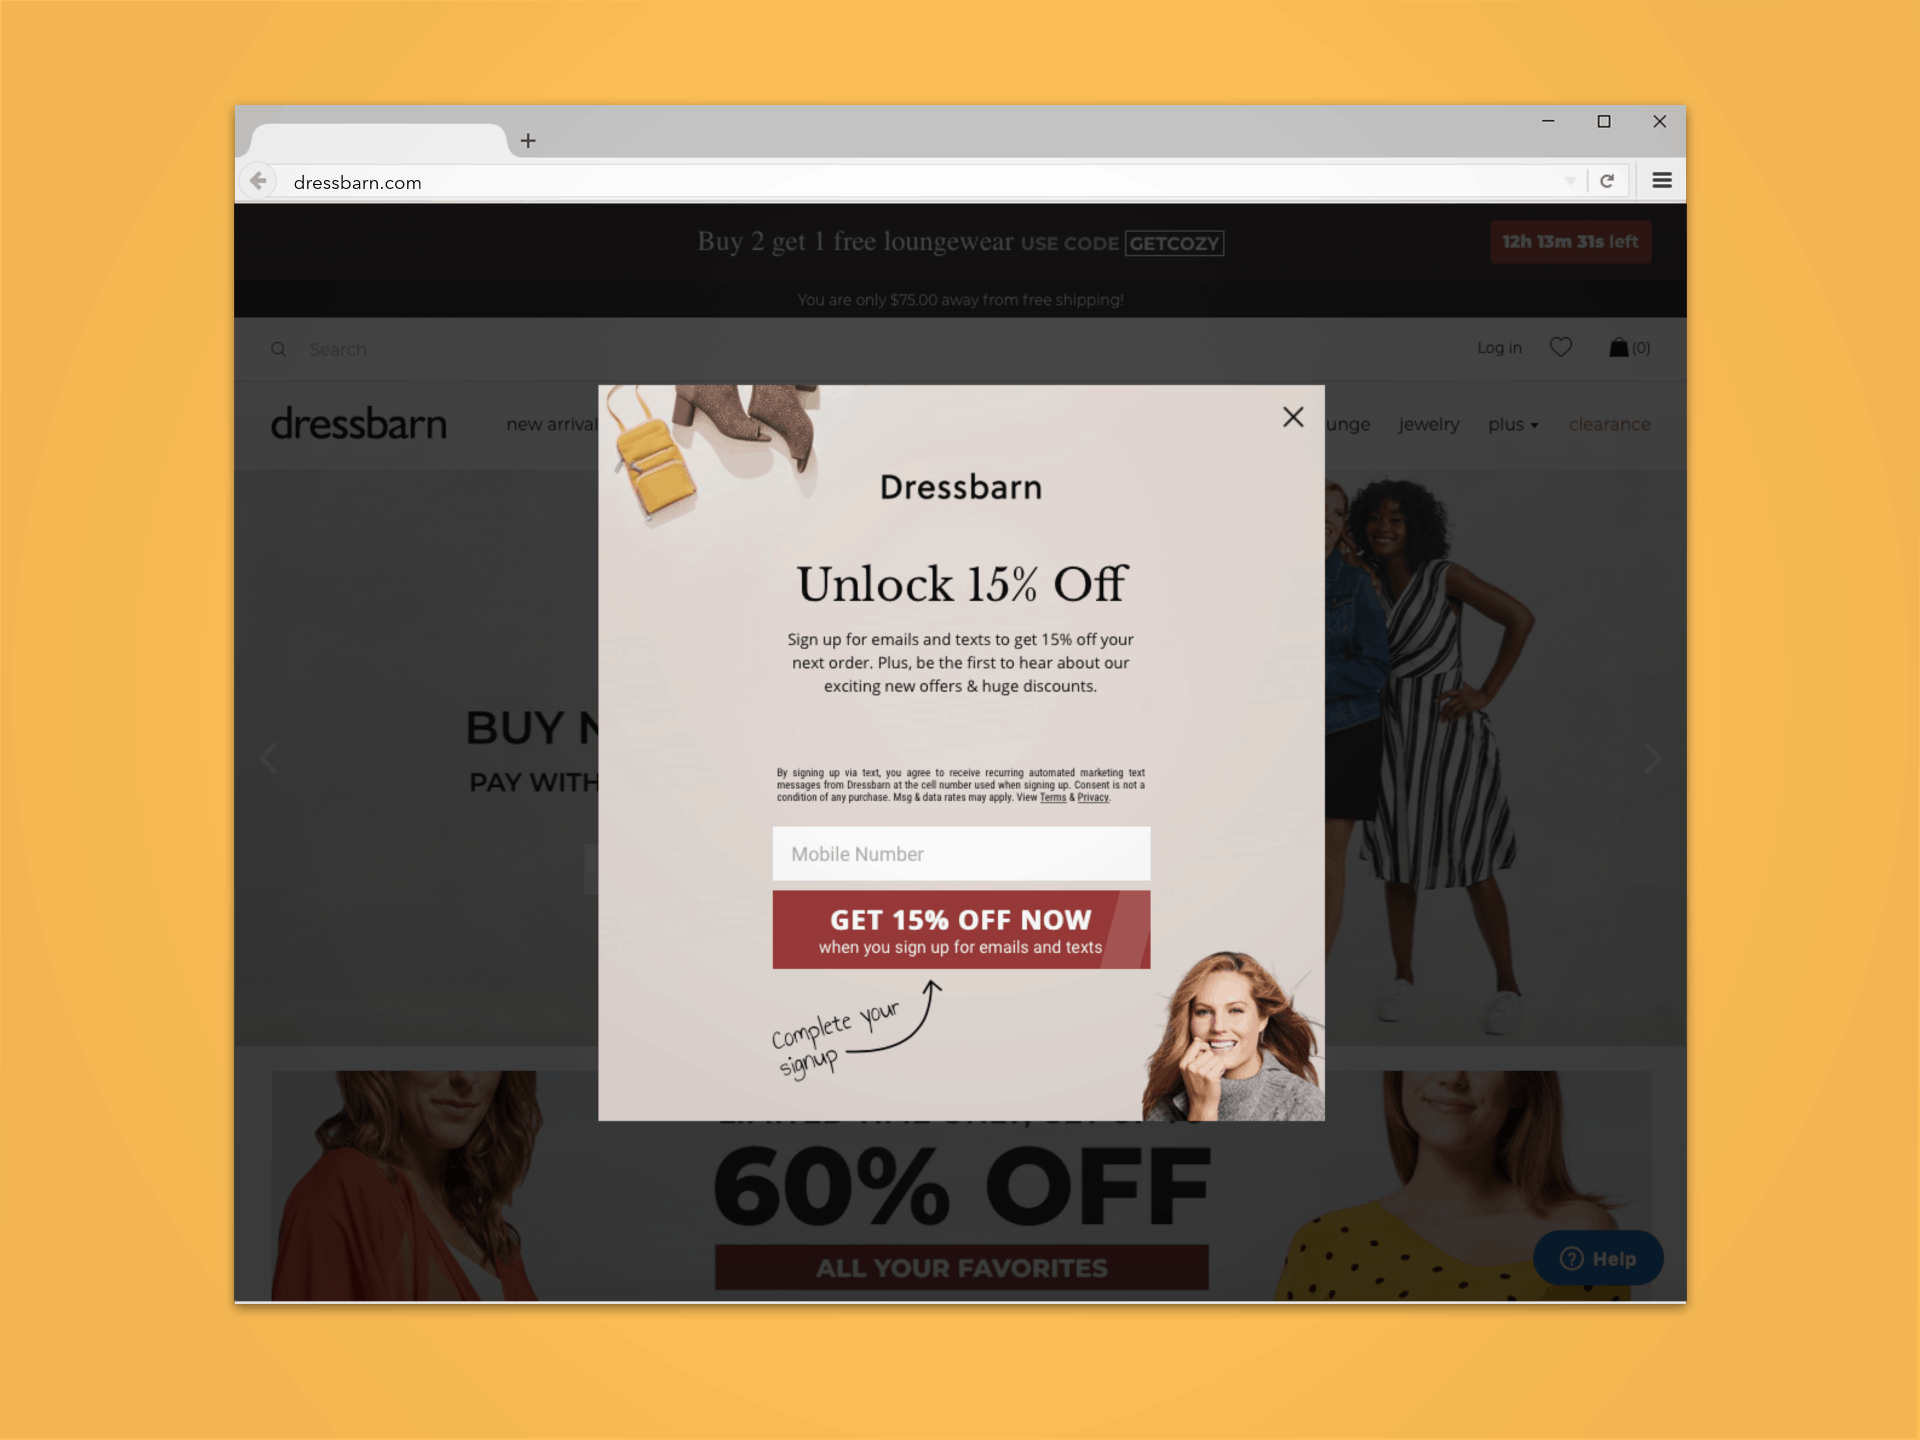 sms marketing pop-up example from dressbarn